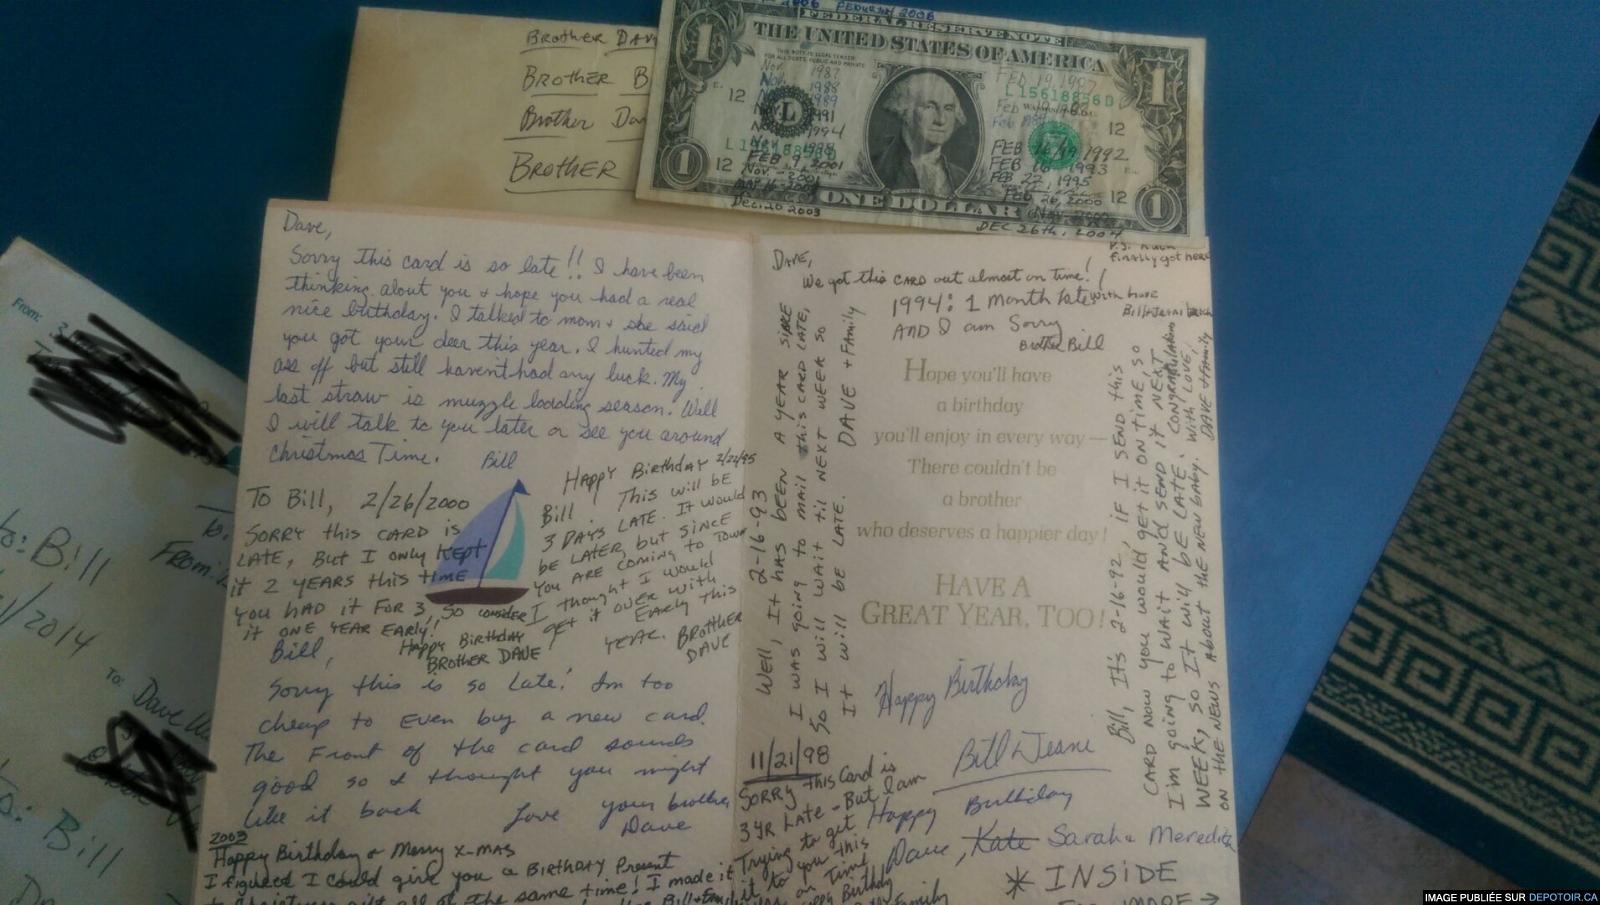 My dad and uncle have exchanged the same birthday card for the past 27 years.